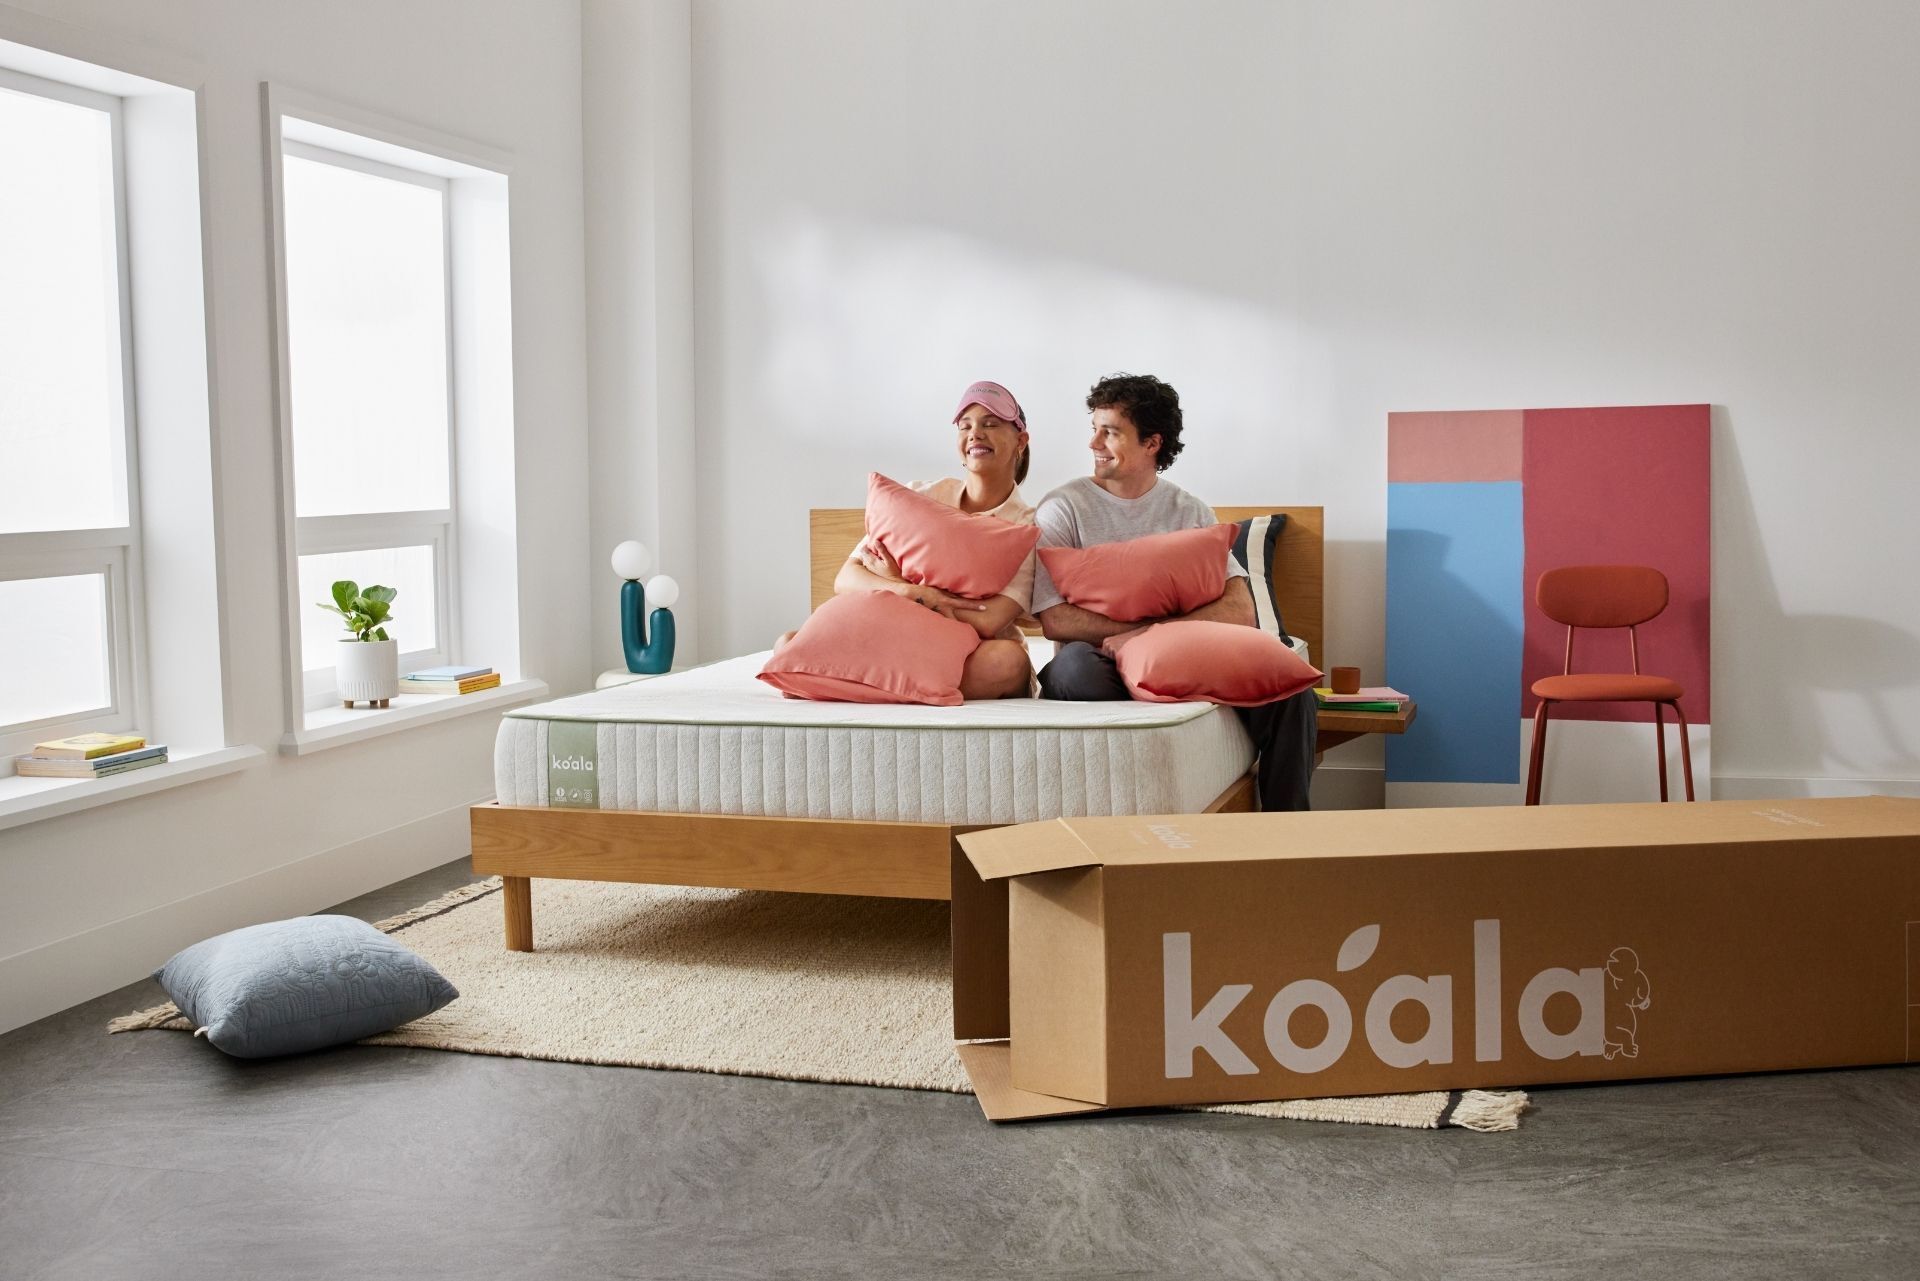 A couple sits on the Koala SE Mattress in their new house. The Koala bed box is featured in the image.